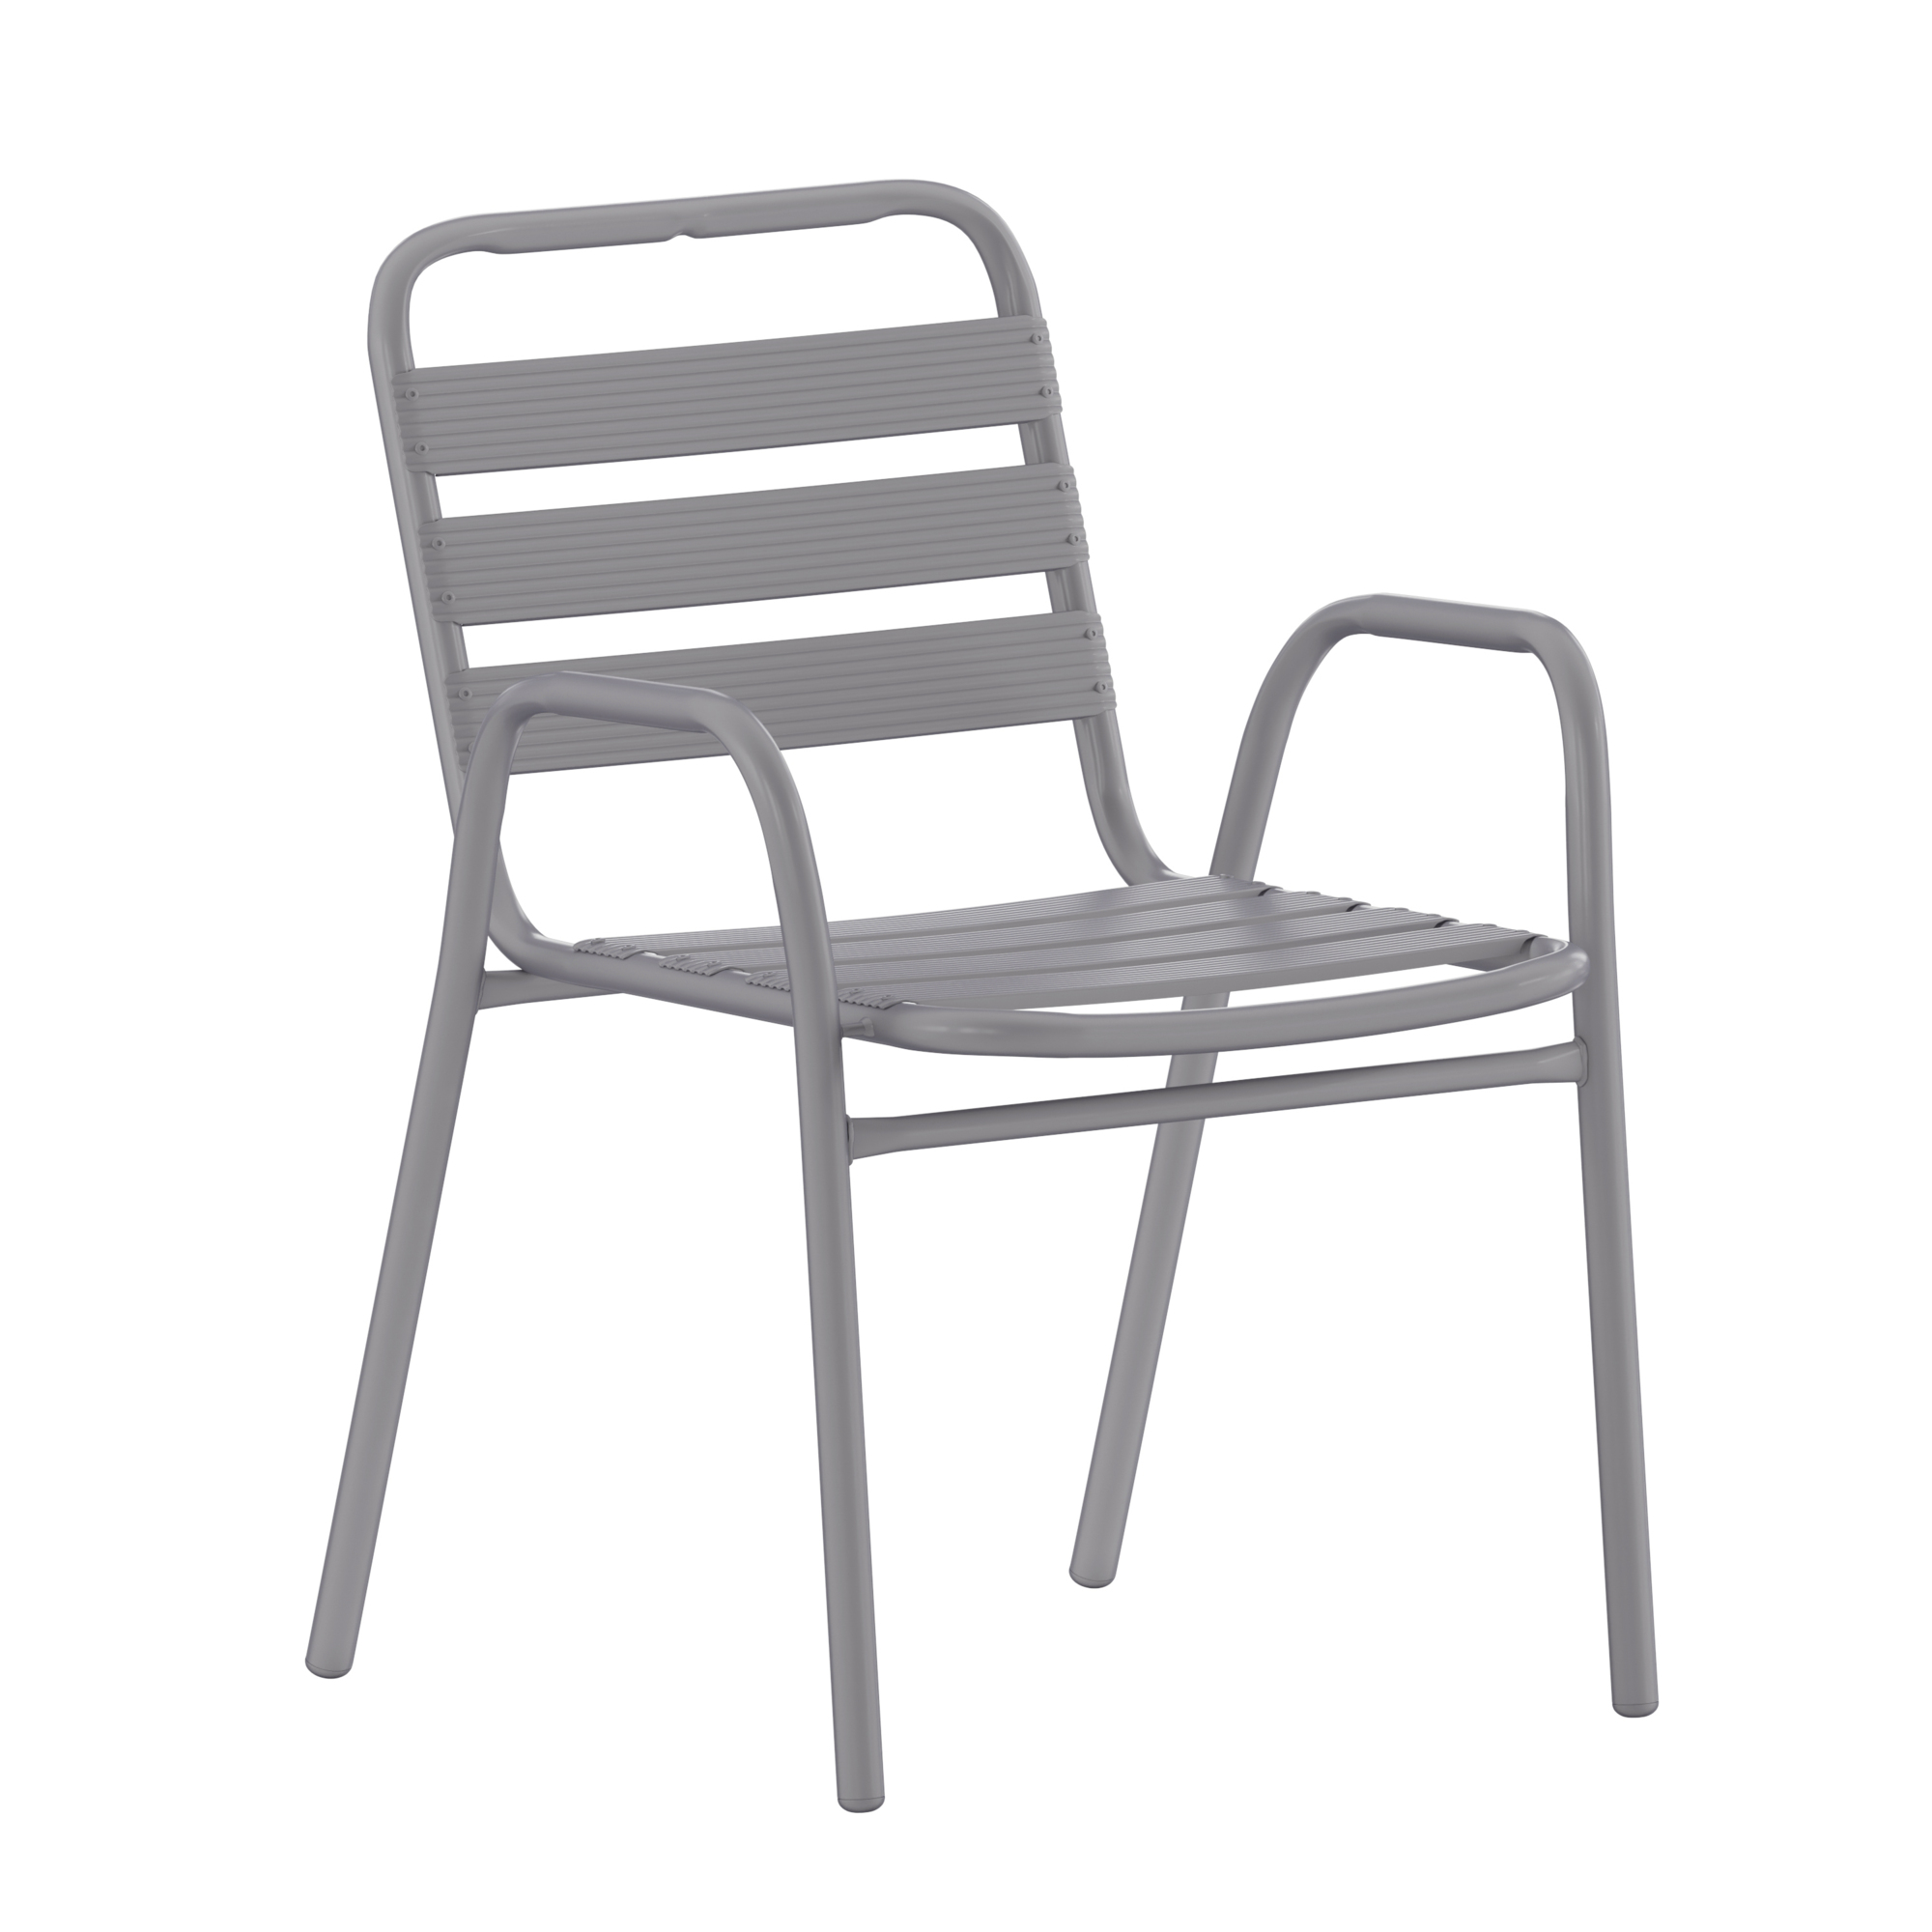 Flash Furniture, Commercial Silver Restaurant Stack Chair with Arms, Primary Color Gray, Material Aluminum, Width 21.25 in, Model TLH018C